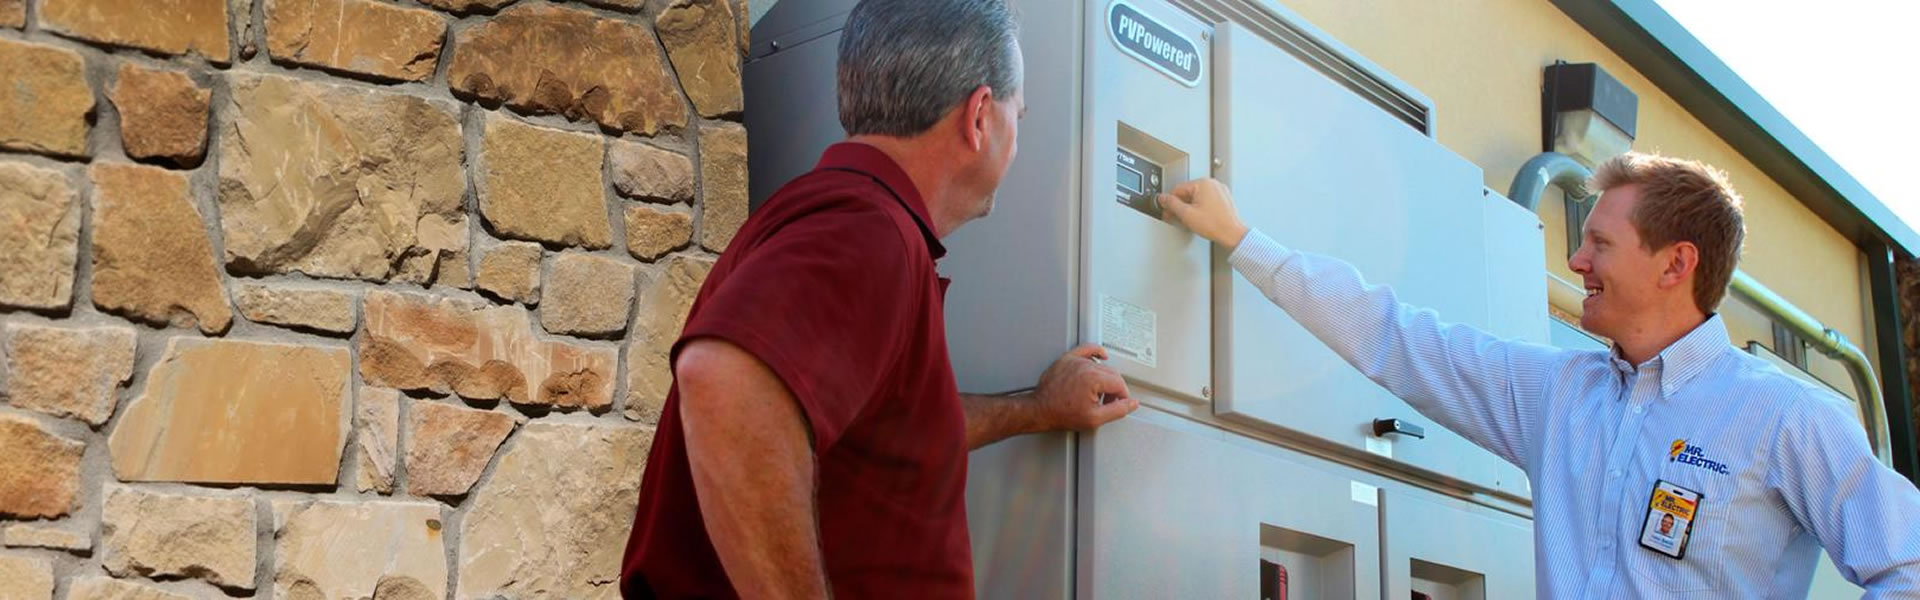 Electrical Panel Replacement in Farmers Branch